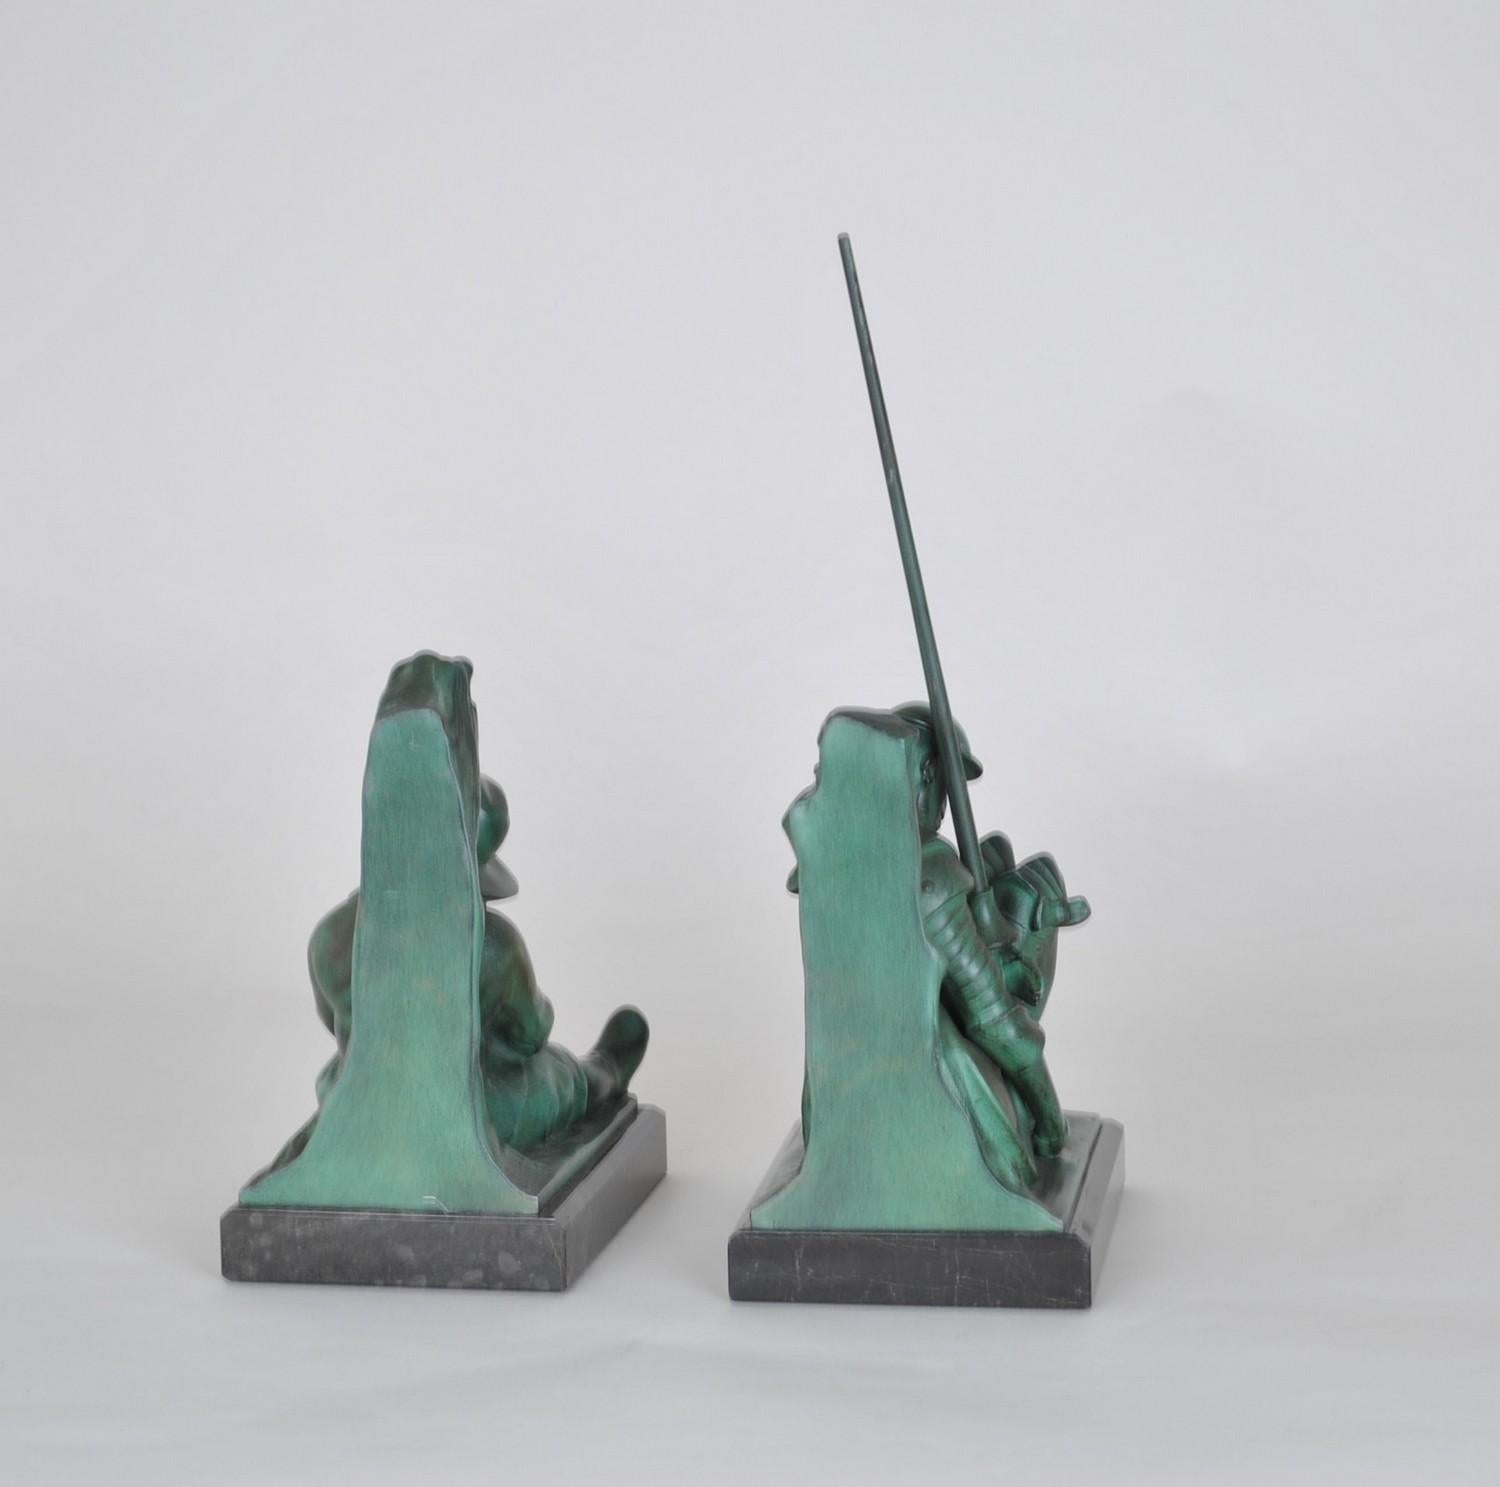 Air of bookends representing the hero of Spanish literature Don Quixote and his faithful Sancho Panza: both are seated, asleep.

Green patina metal sculptures (spelter), one of them is signed Janlé and bears the mention 